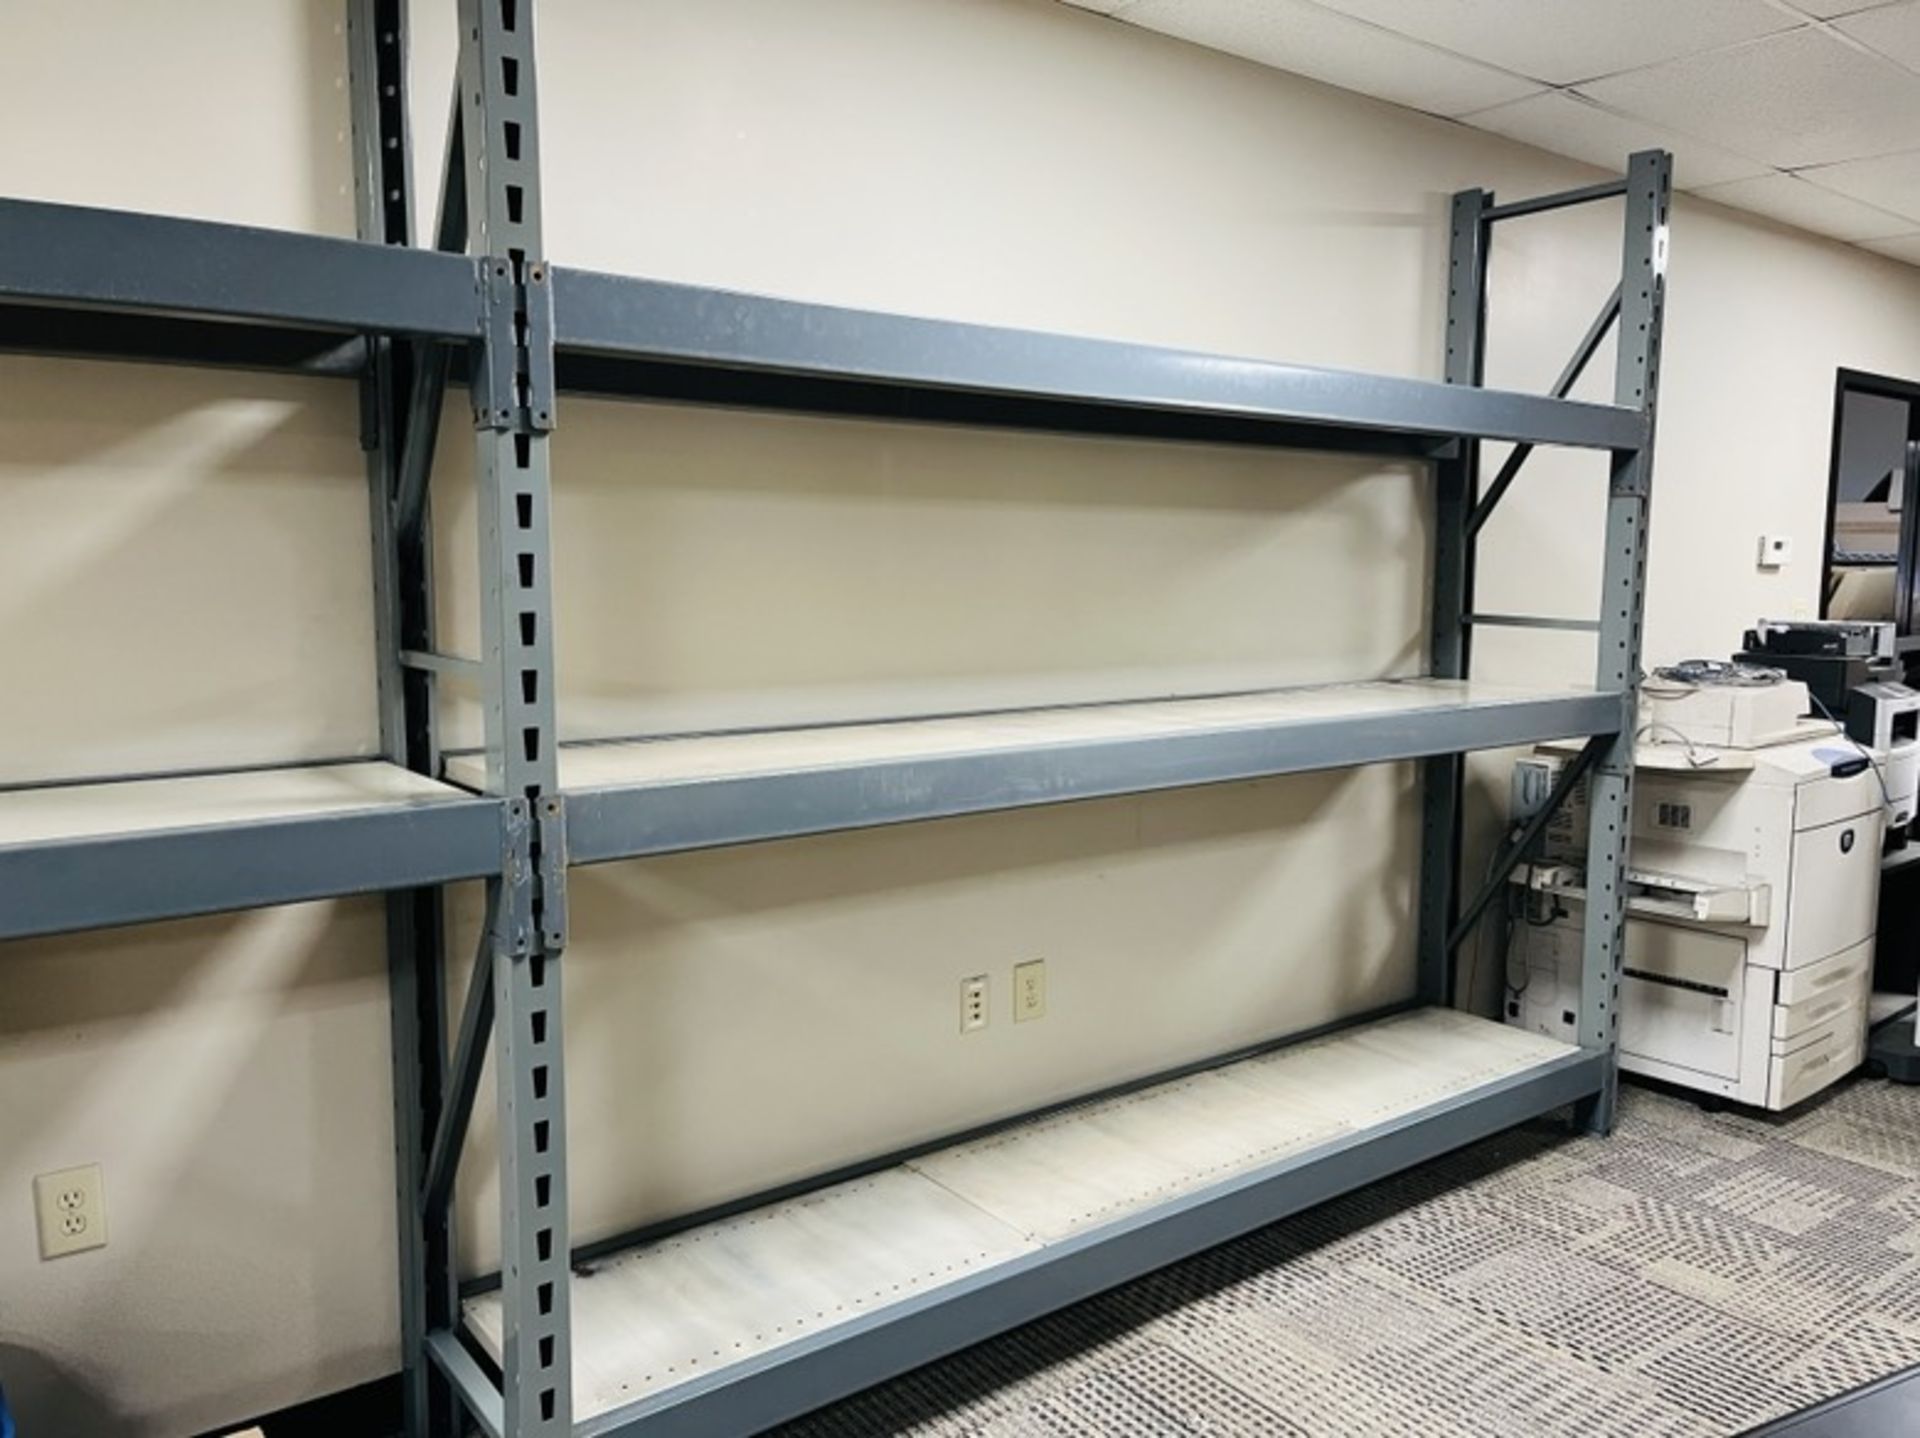 5 SECTION OF RETAIL/MERCHANDISE PALLET RACK SHELVING 6'H X 21.5"D X 108"L WITH 3 SHELVES